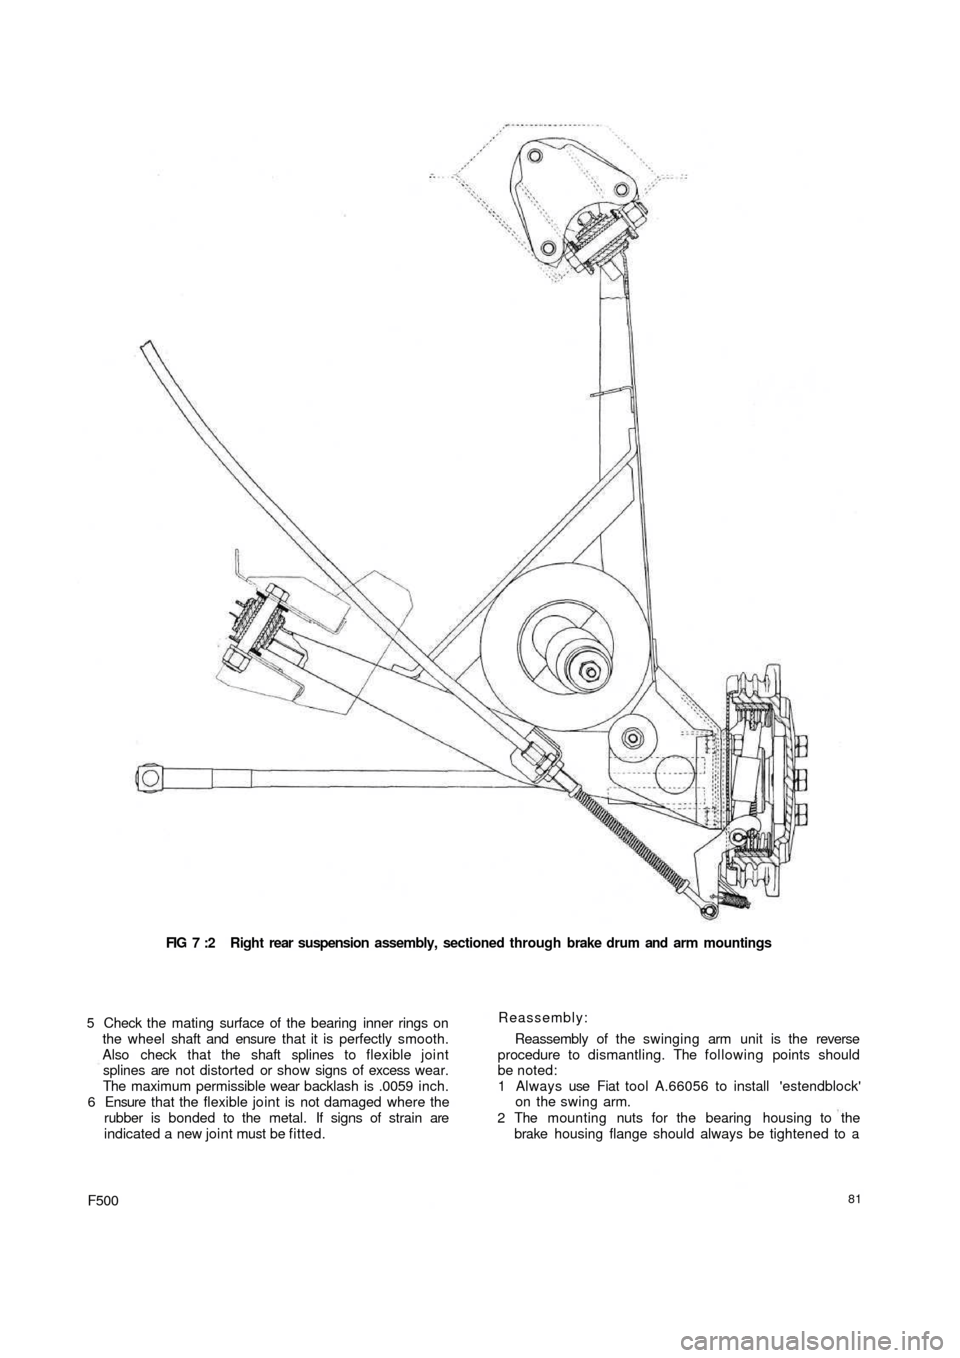 FIAT 500 1968 1.G Workshop Manual FIG 7 :2  Right rear suspension  assembly, sectioned through brake drum and arm mountings
5 Check the mating surface of the bearing inner rings on
the wheel shaft and ensure that it is perfectly smoot